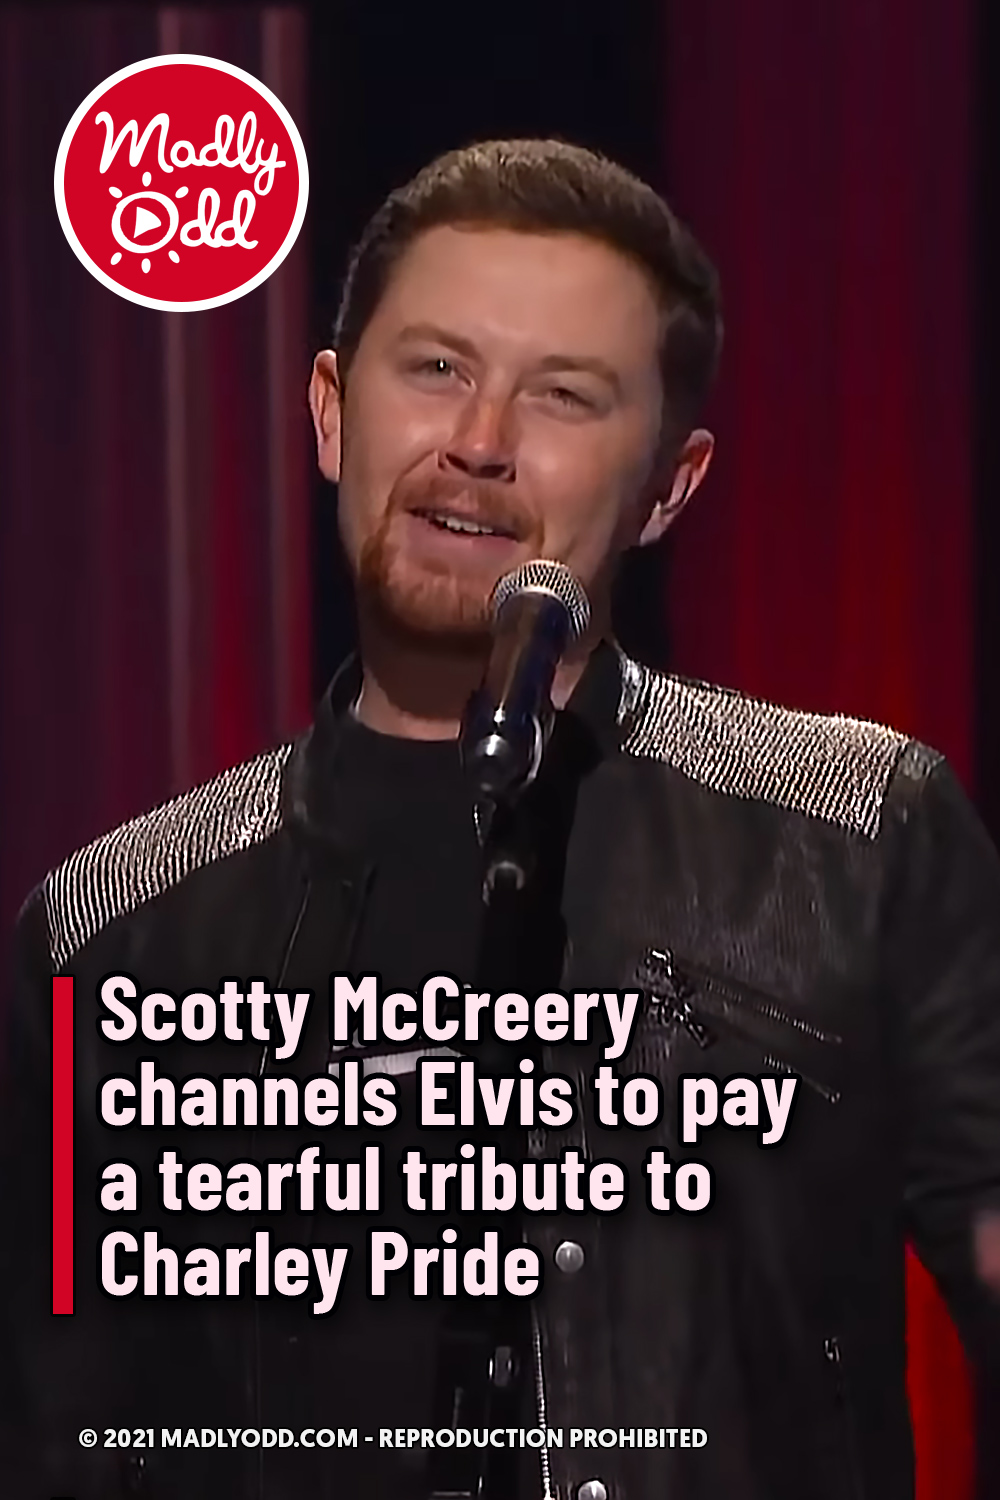 Scotty McCreery channels Elvis to pay a tearful tribute to Charley Pride